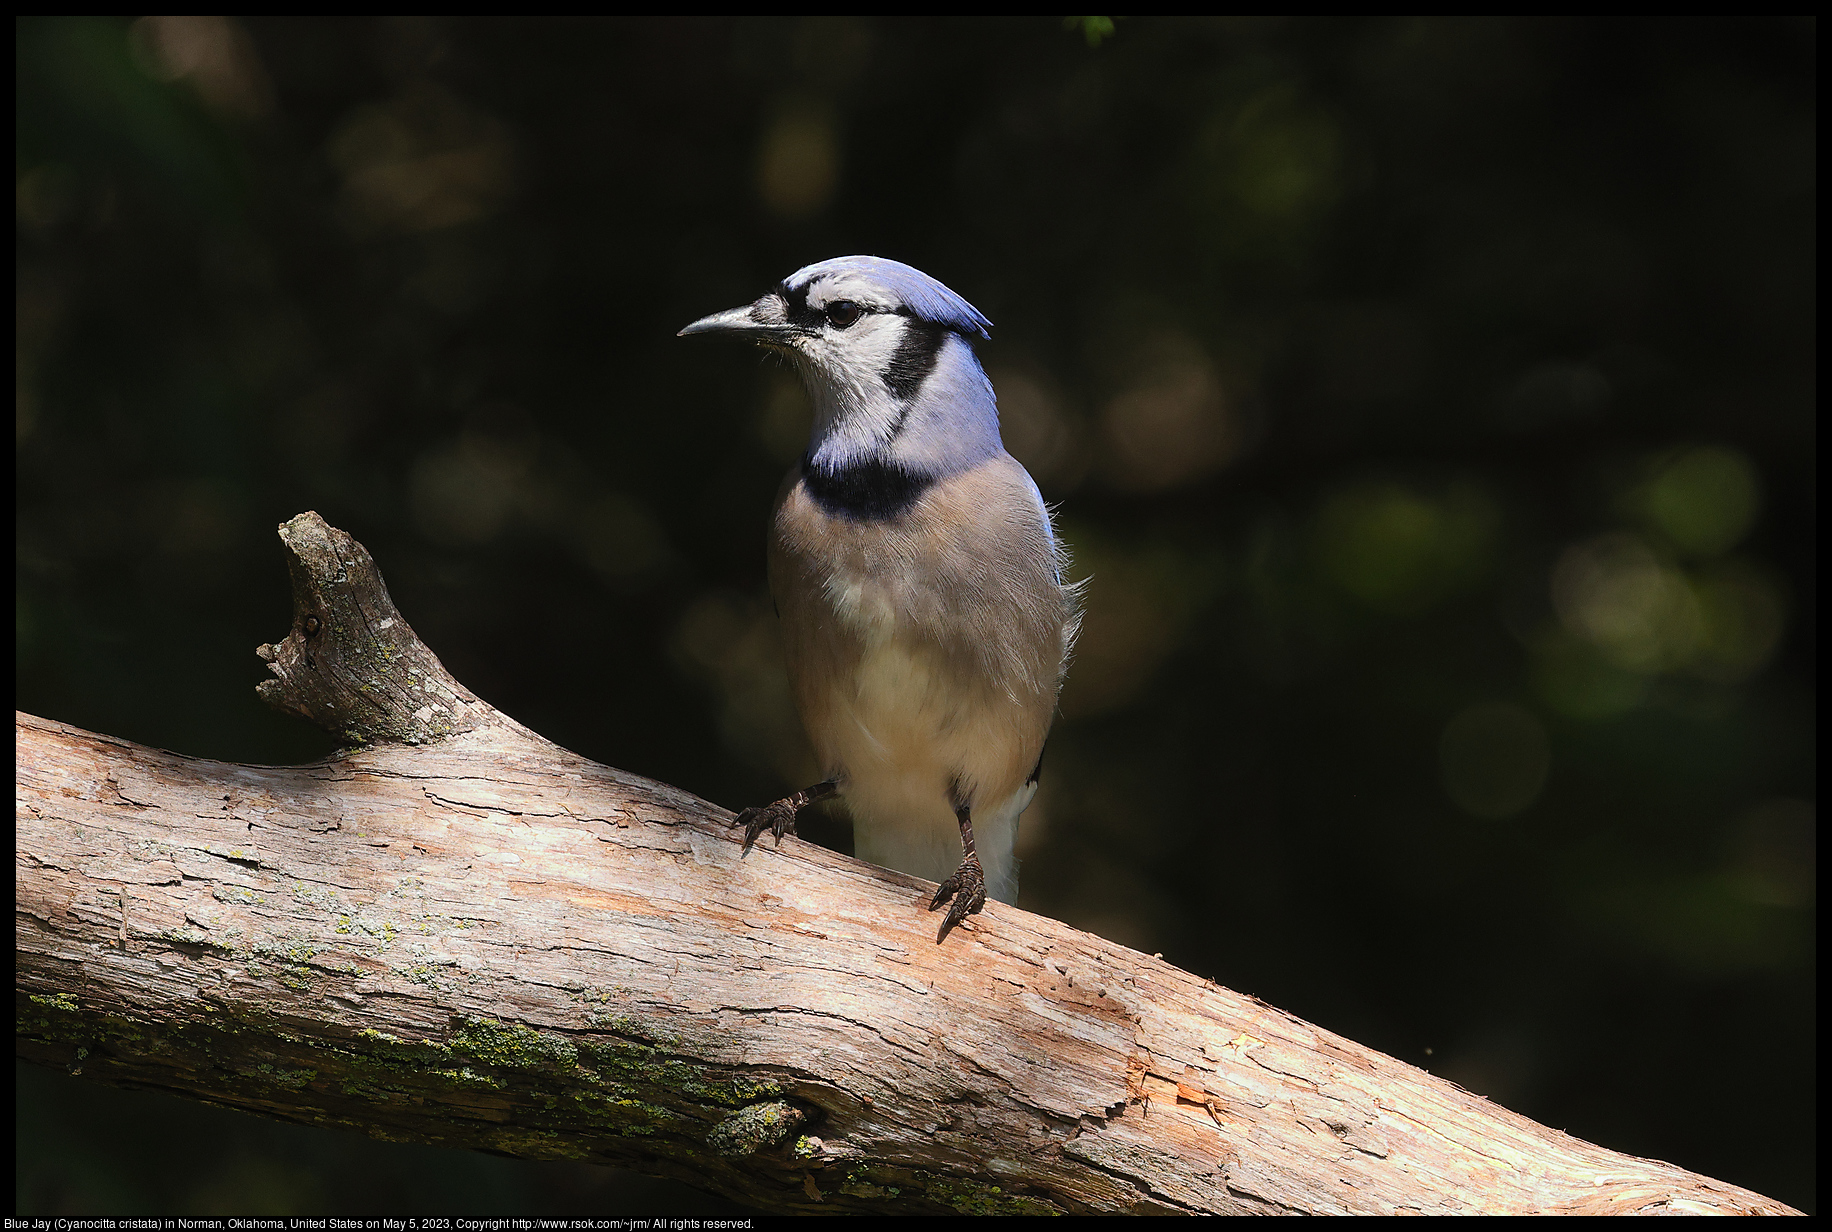 Blue Jay (Cyanocitta cristata) in Norman, Oklahoma, United States on May 5, 2023